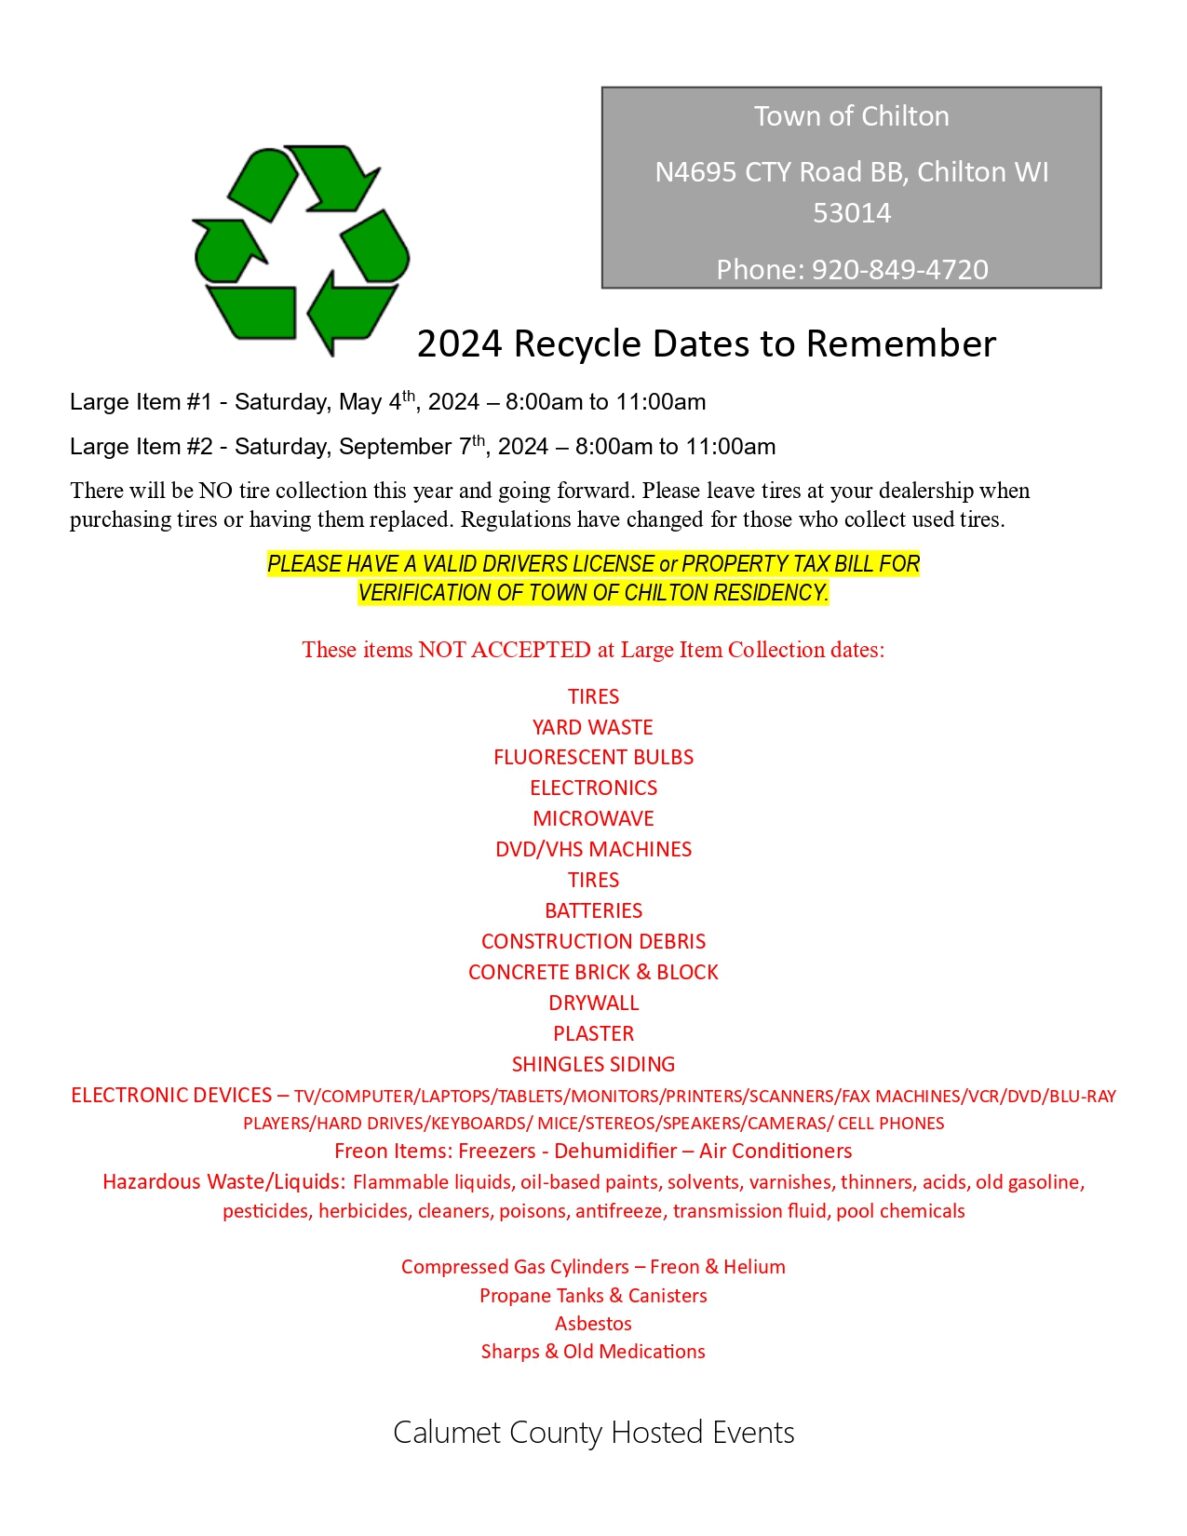 2024 Recycle Dates to Remember Town of Chilton, Calumet County, WI